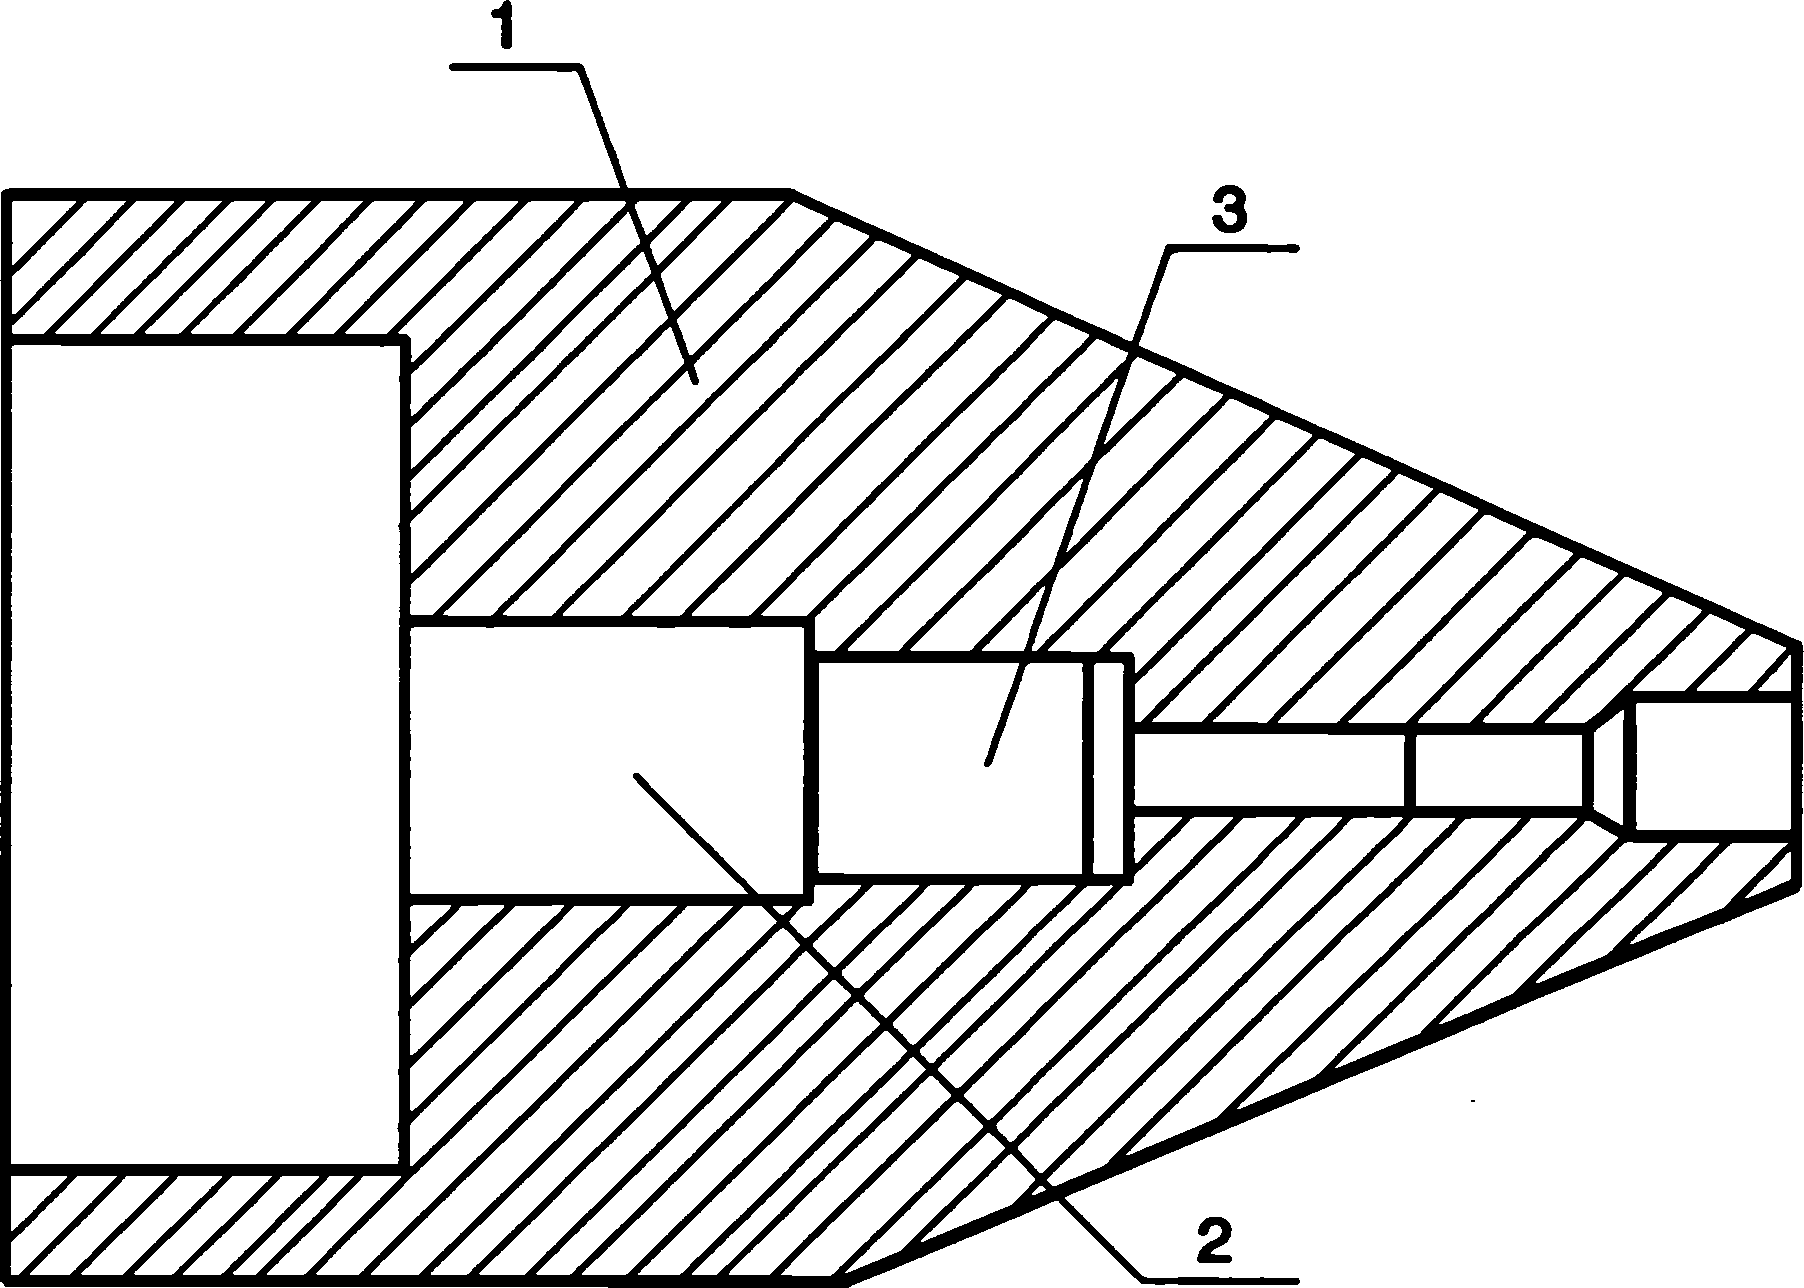 Process of grinding nozzle for impacting generator set